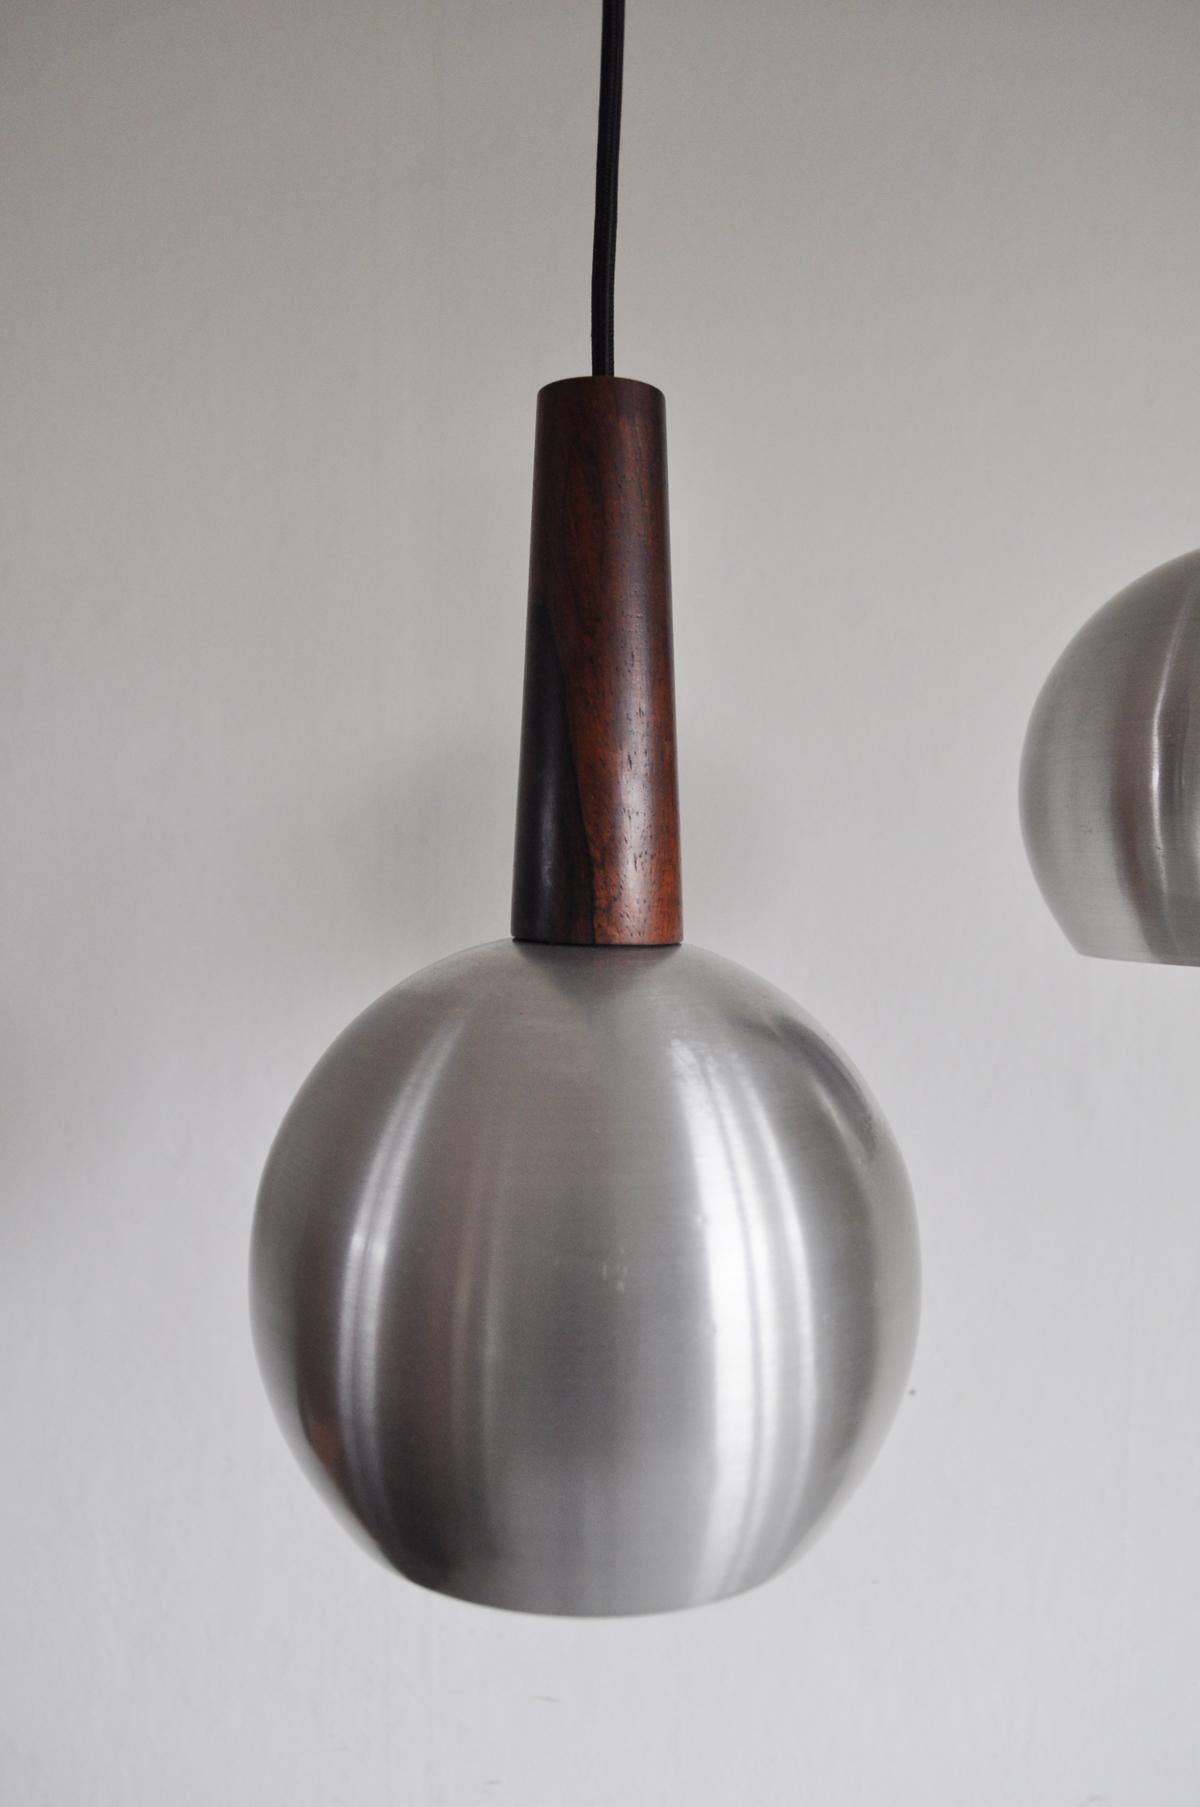 20th Century Danish Modern Pendants in the Style of Verner Panton, 1960s For Sale